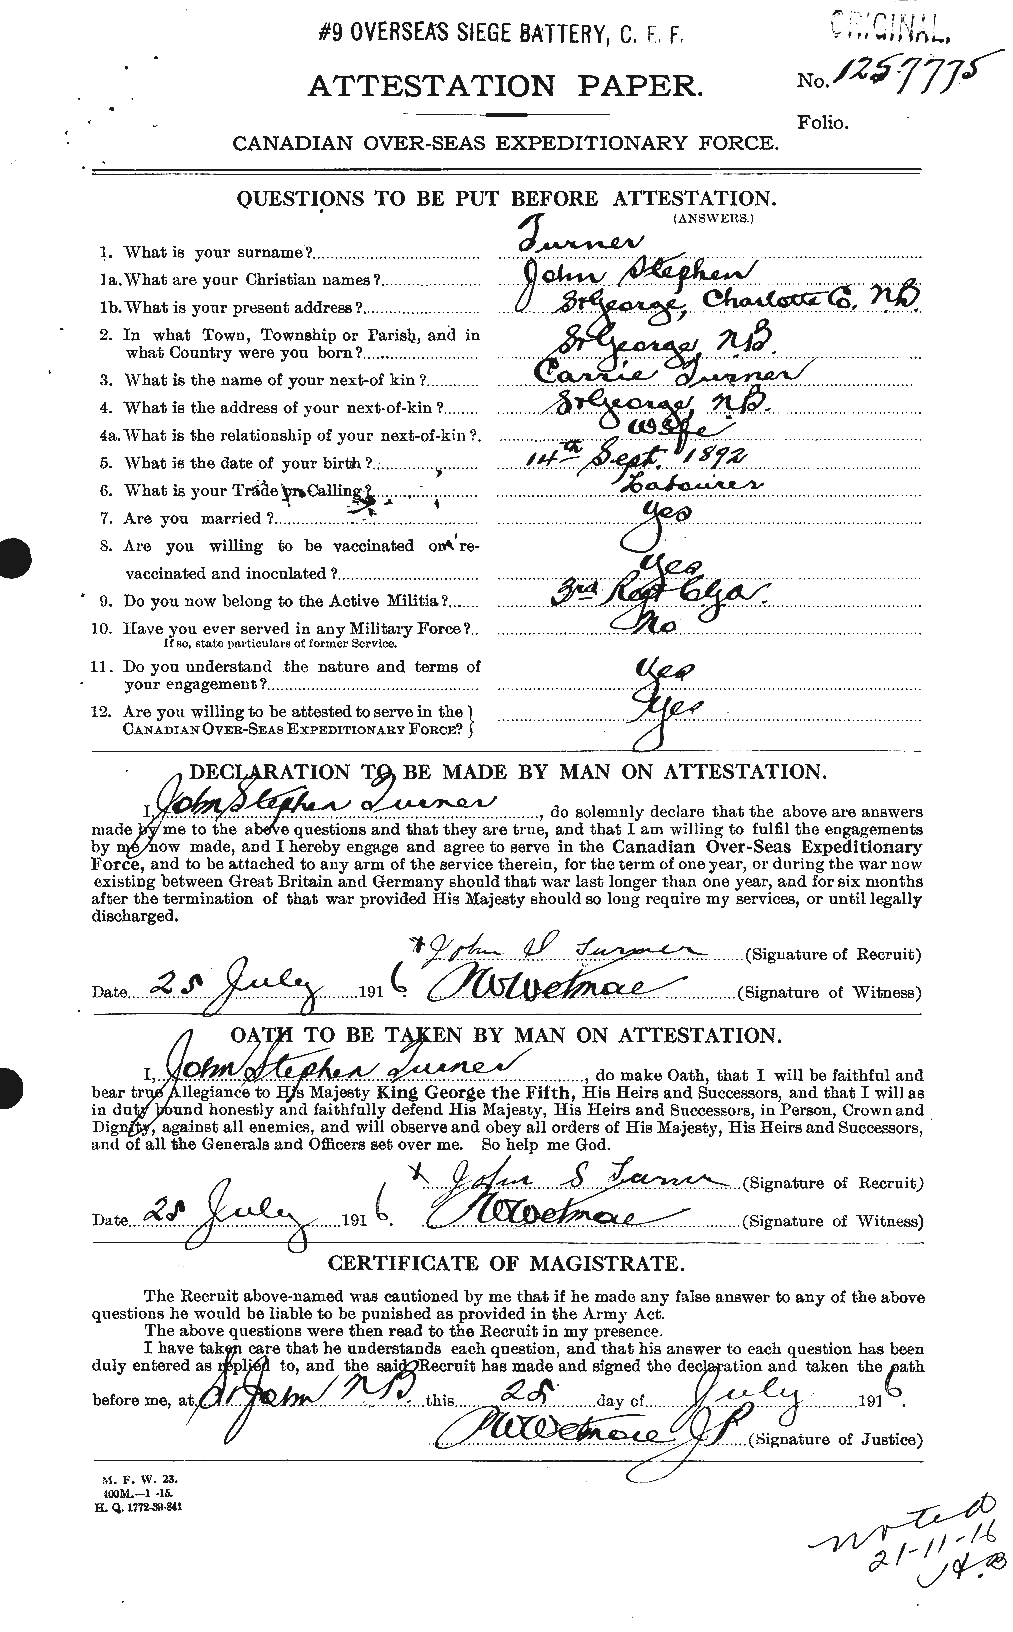 Personnel Records of the First World War - CEF 642102a